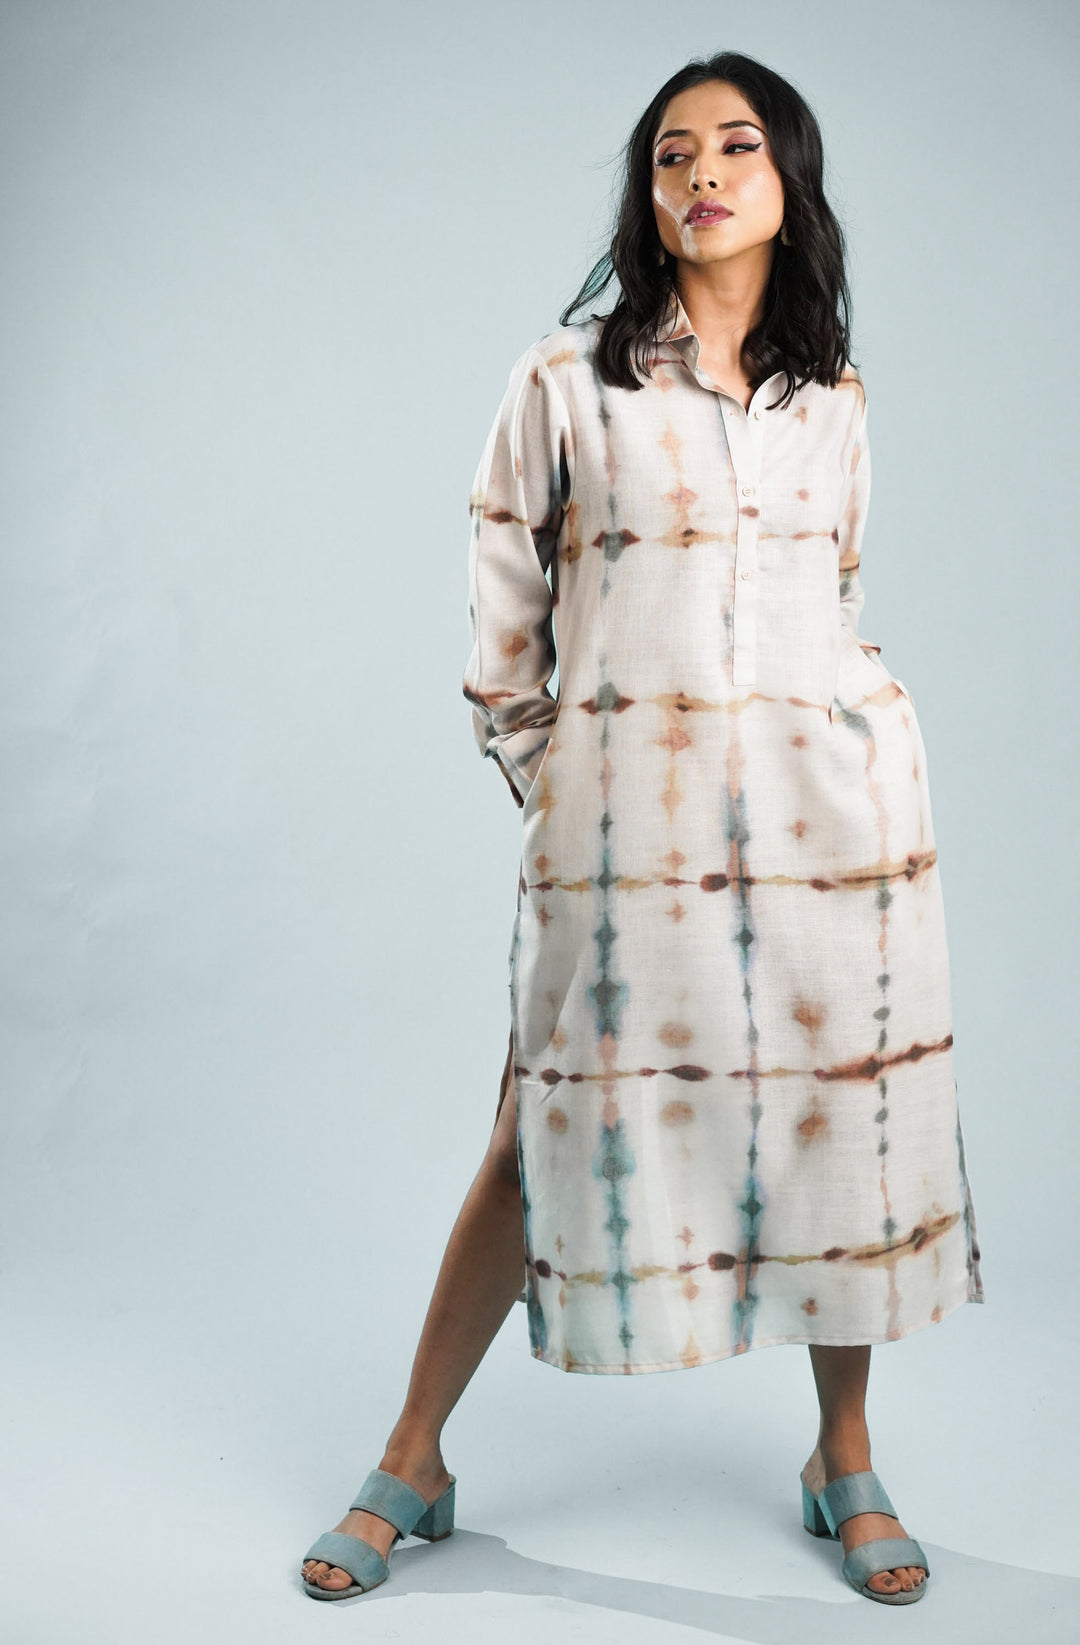 Stylish shirt dress with relaxed fit